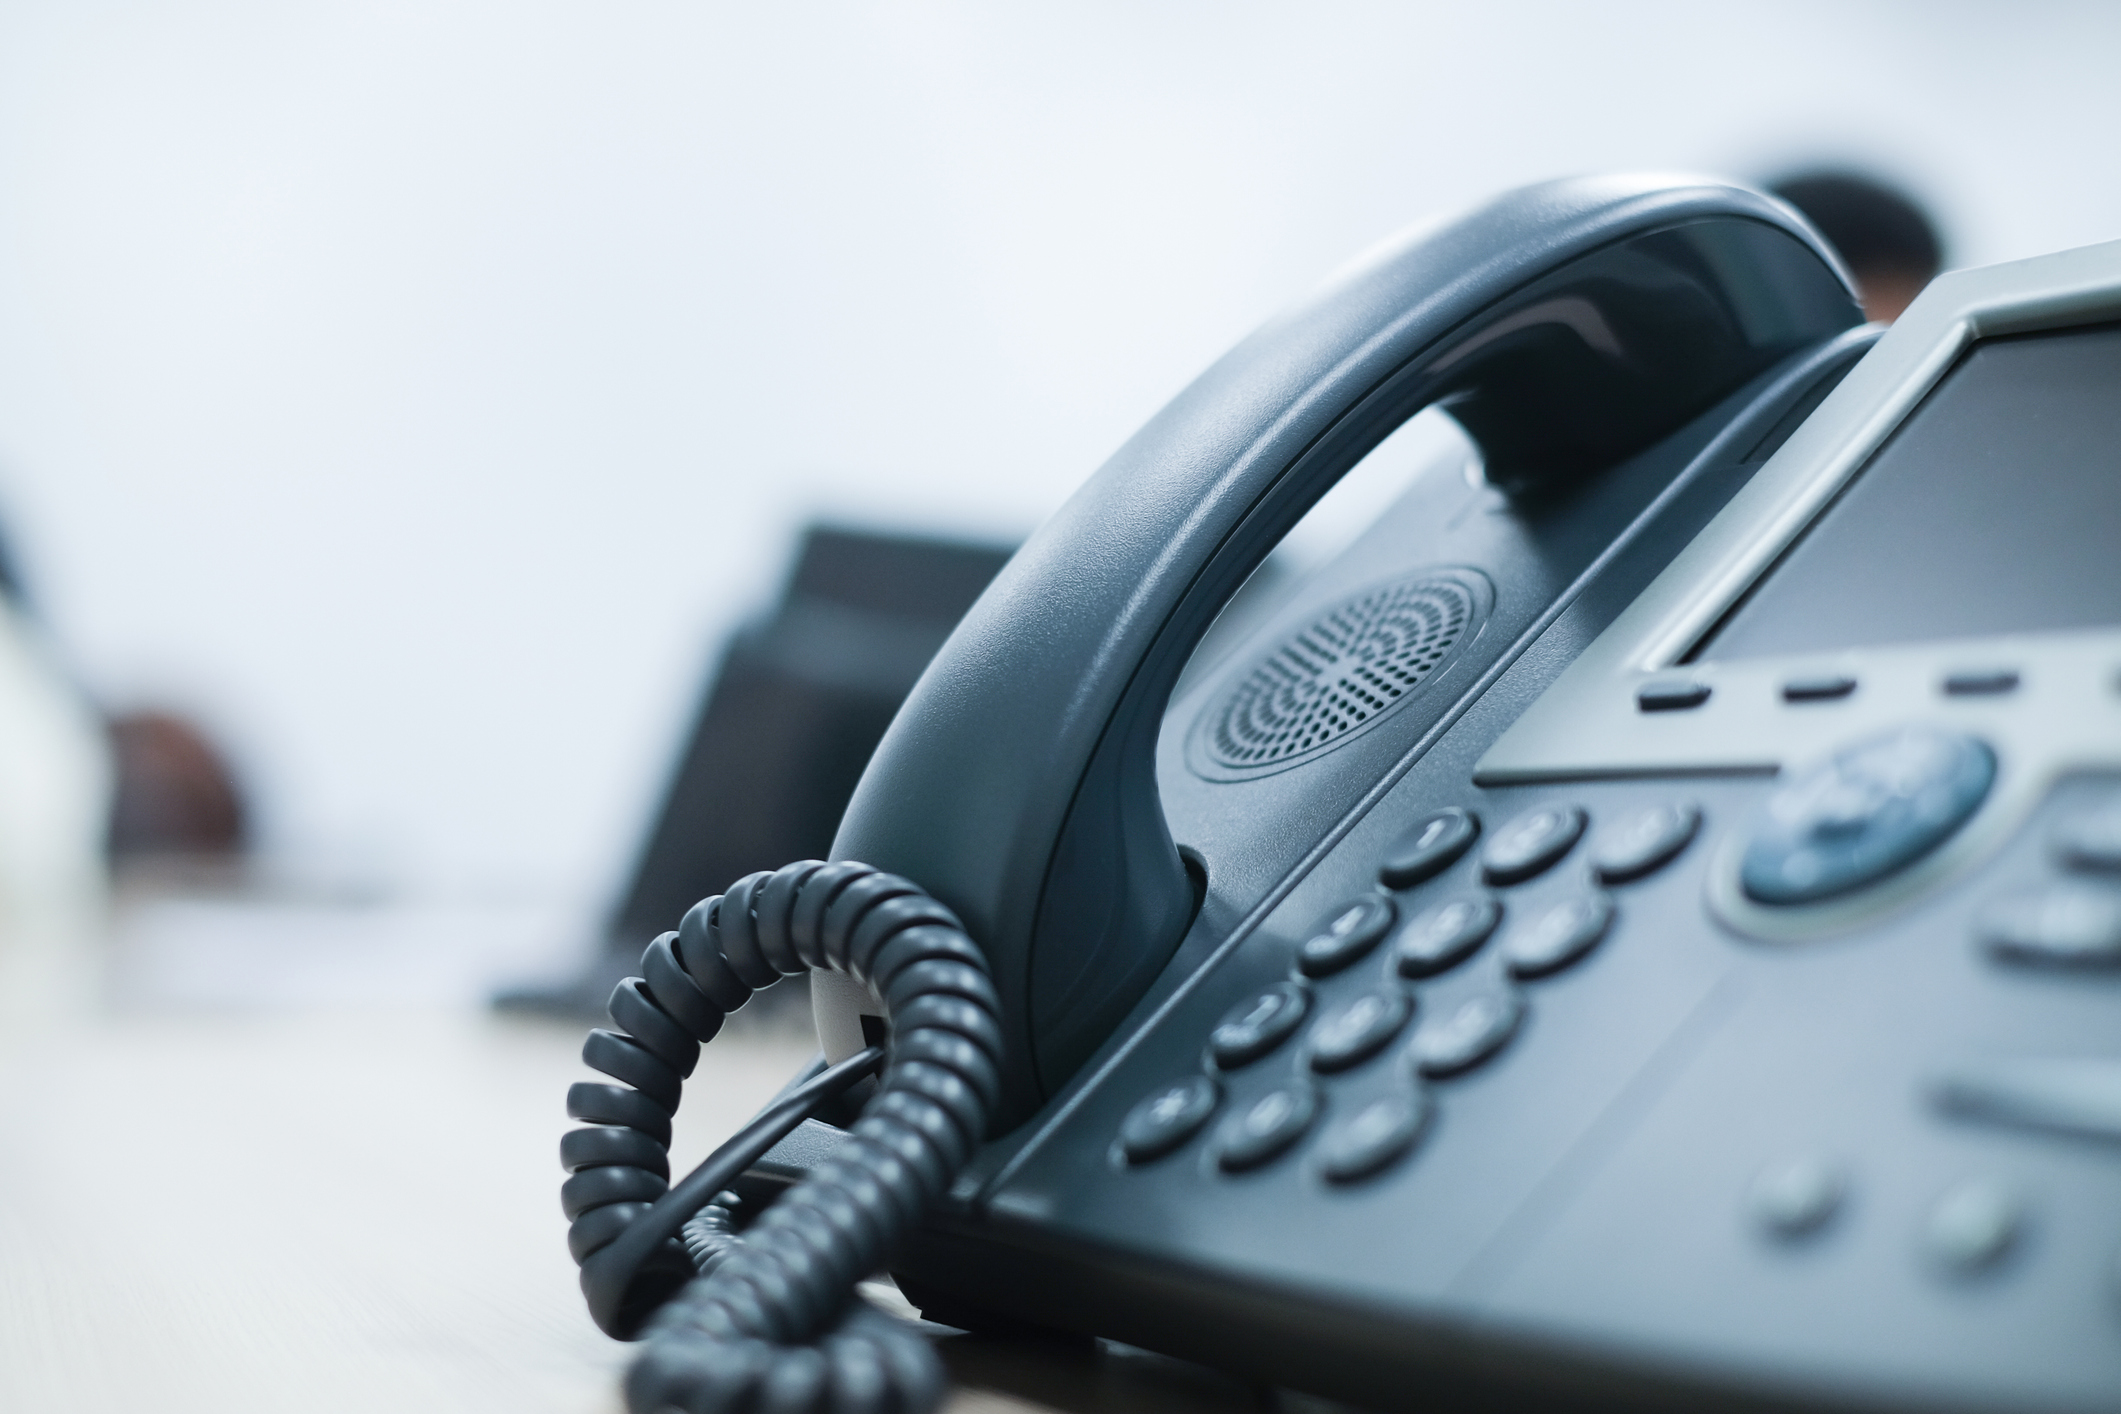 Take measures to protect your business phone system